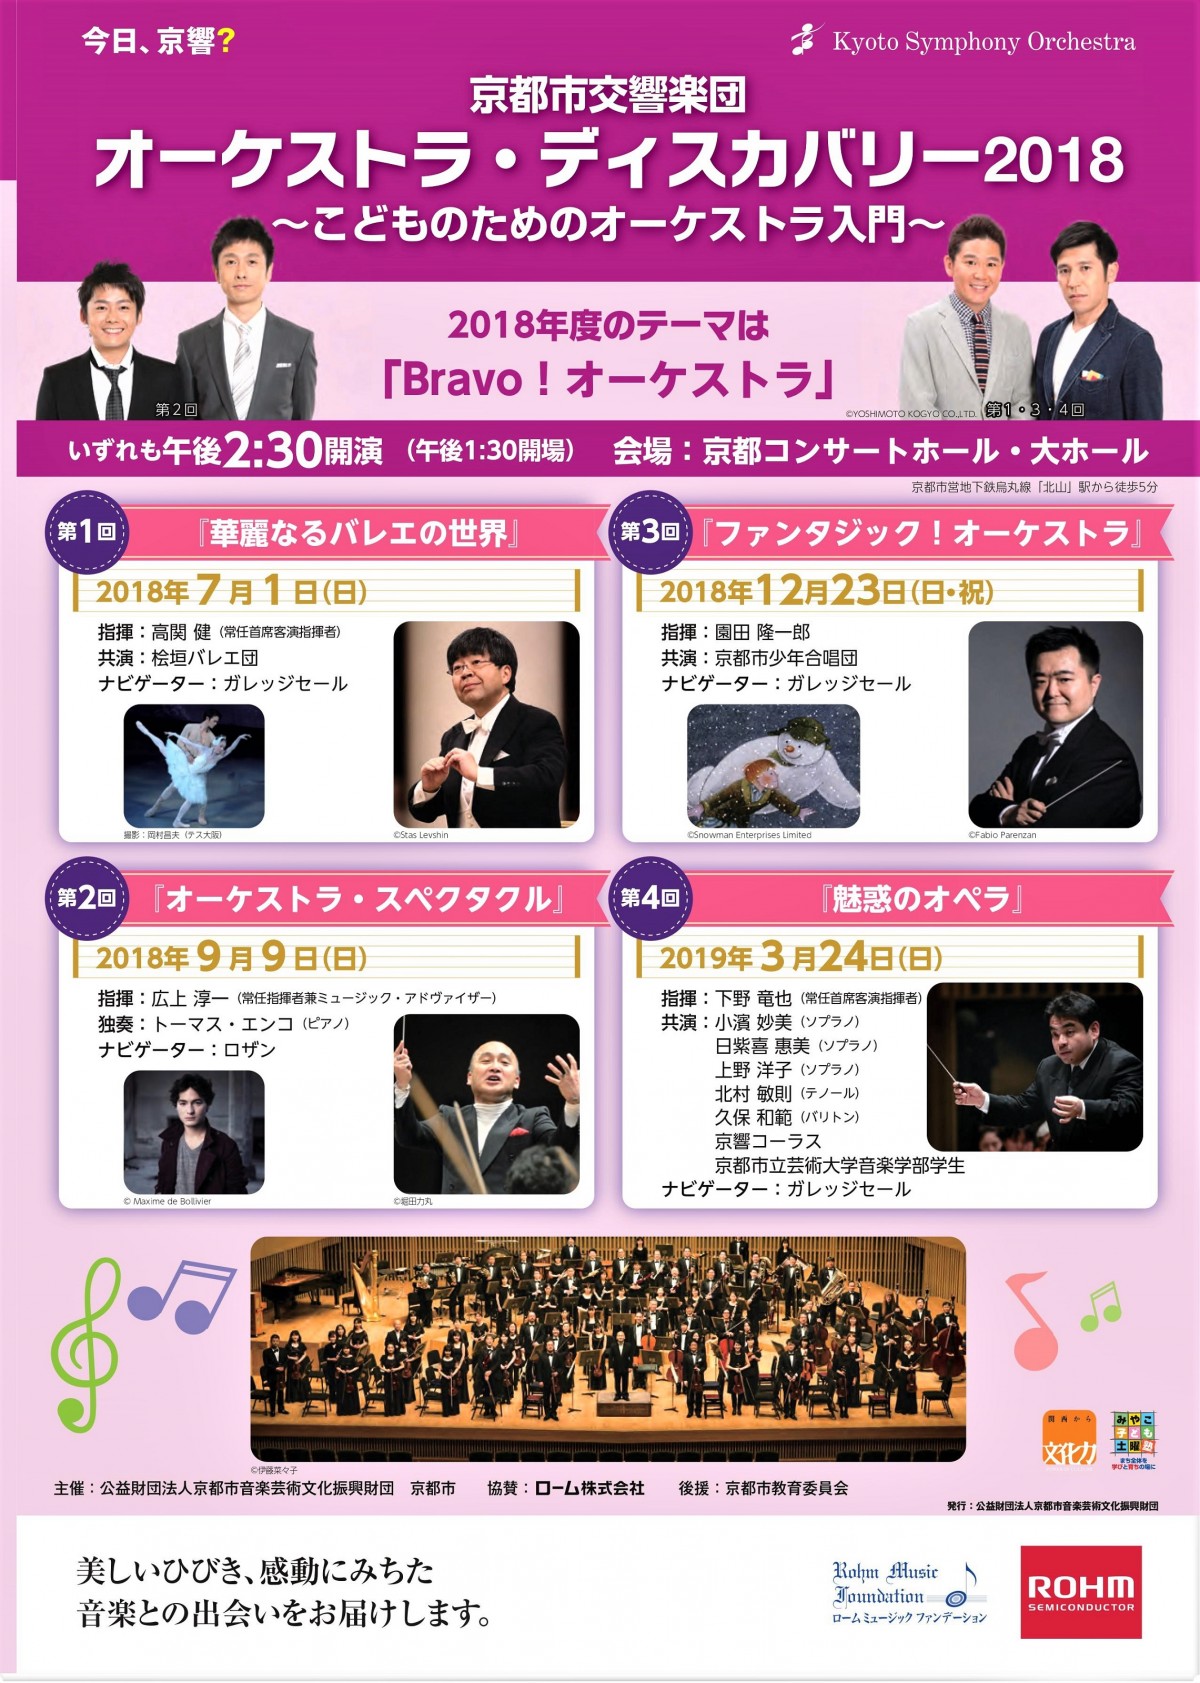 Orchestra Discovery 2018 <Bravo ! Orchestra>
Vol.4 <The Enchanted Opera>
(SOLD OUT !)